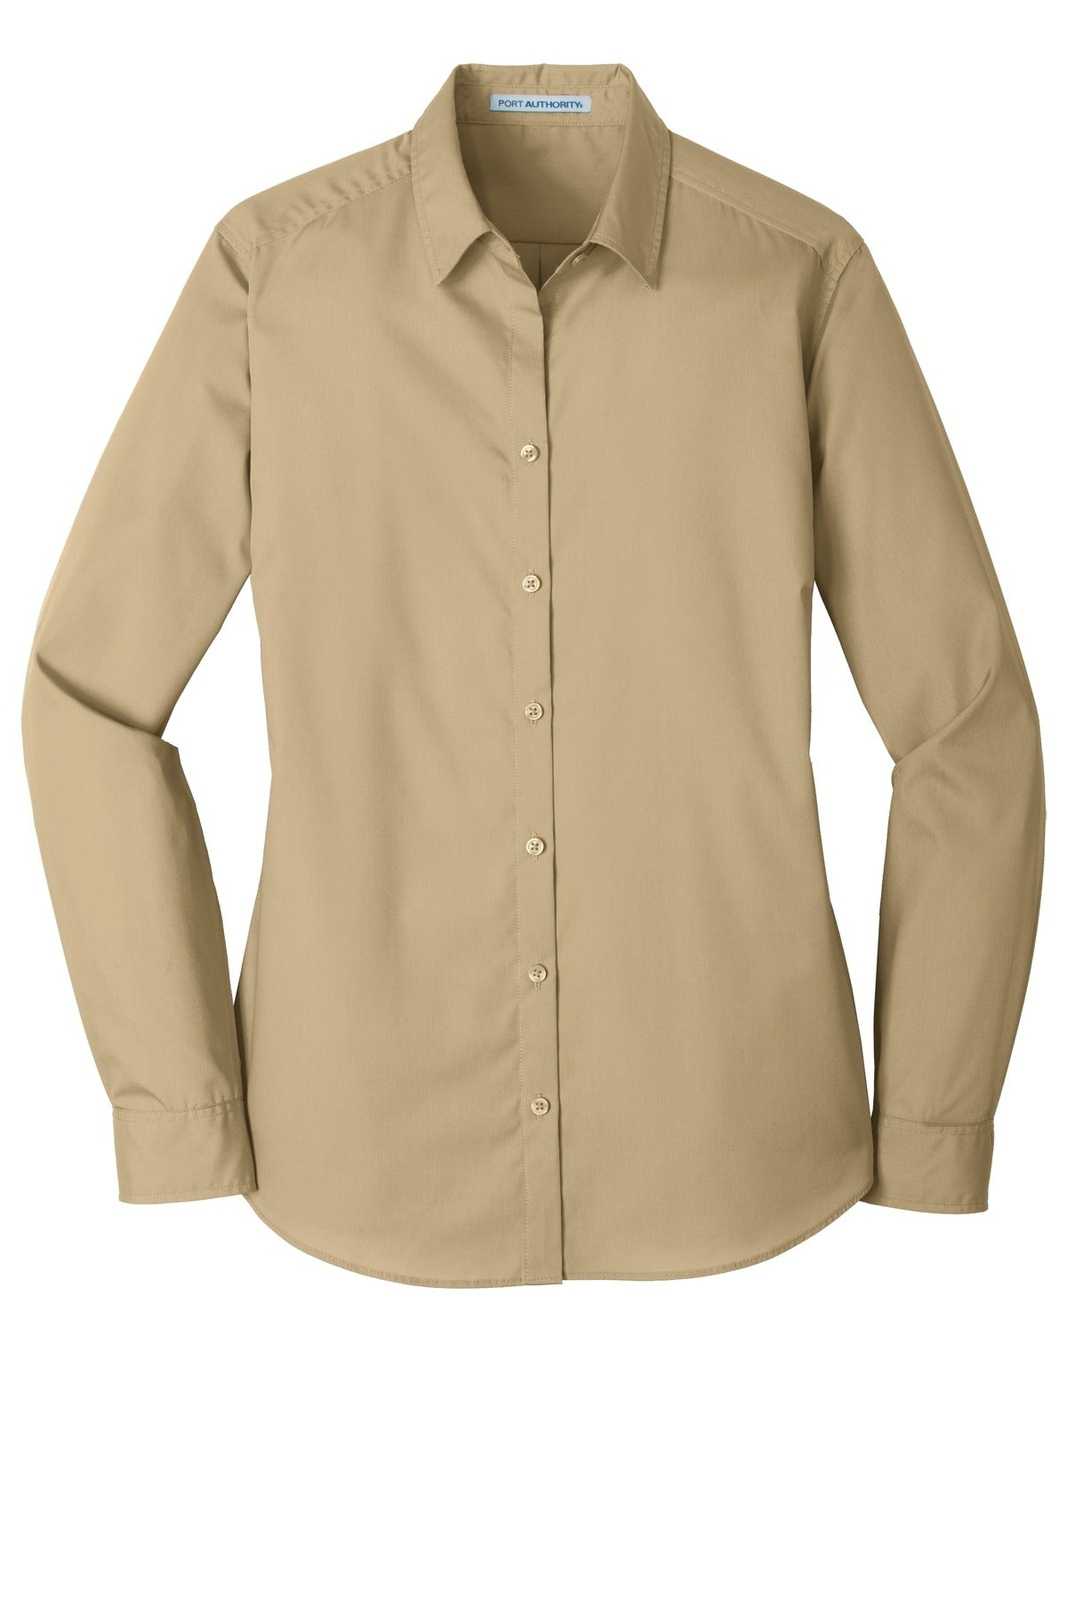 Port Authority LW100 Ladies Long Sleeve Carefree Poplin Shirt - Wheat - HIT a Double - 5